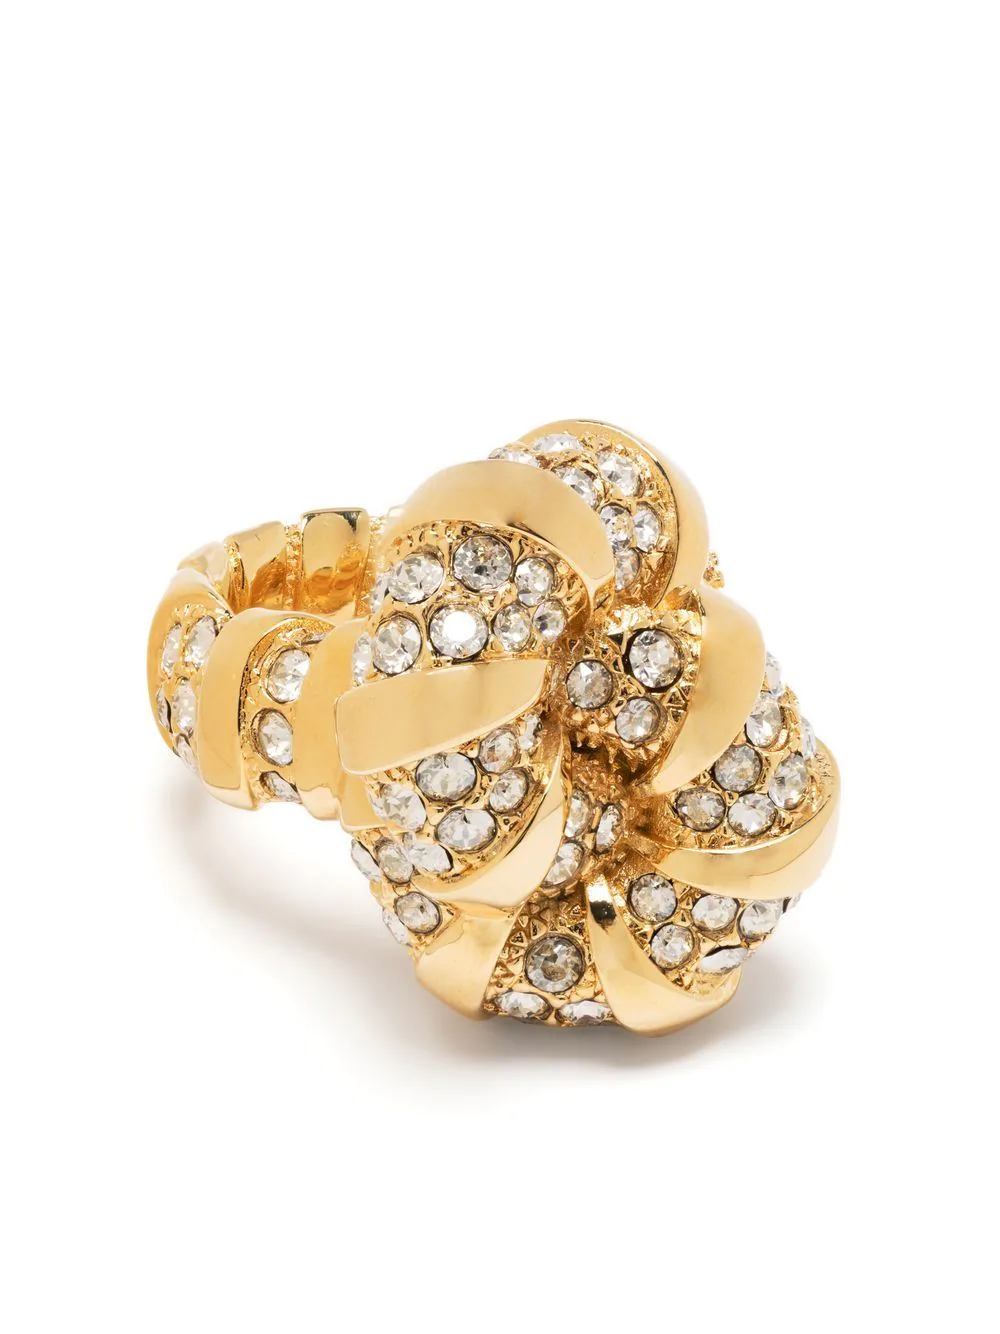 Lanvin Mélodie Ring With Crystals In Metallic